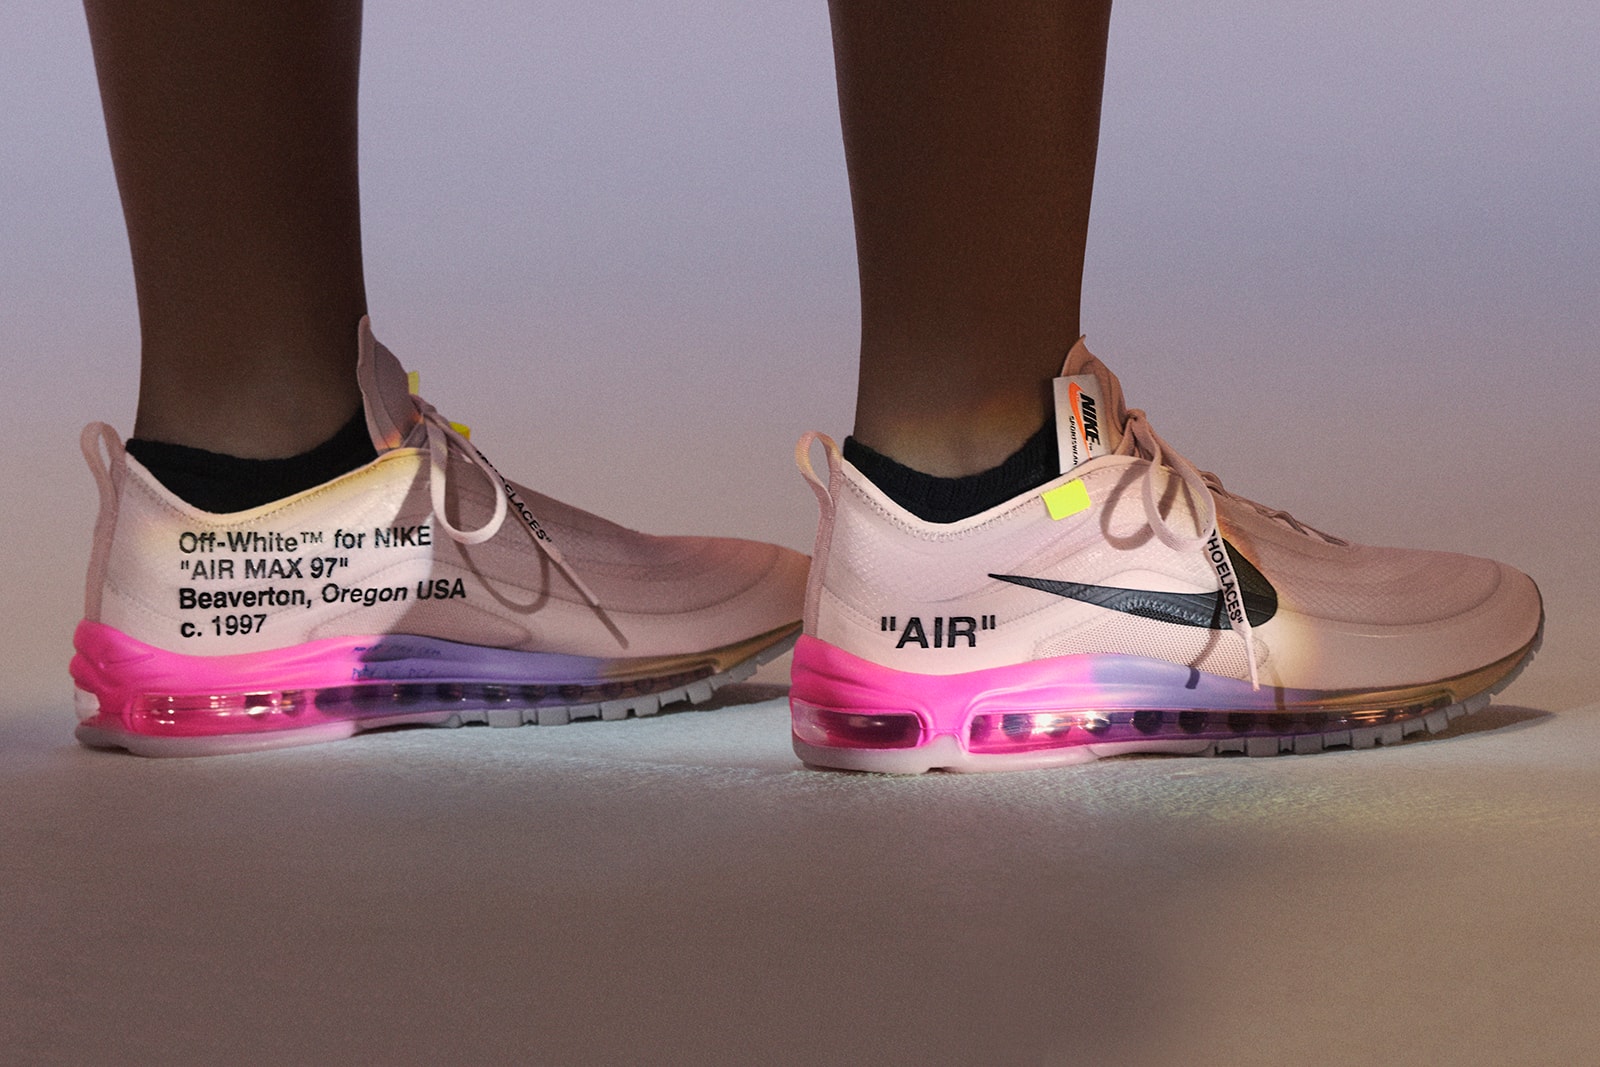 Virgil Abloh x Serena Williams x Nike "Queen" Collab Details Collection Air Max 97 Blazer Mid SW US Open Flushing Meadows NikeCourt Flare 2 PE Dresses Bomber Jacket Bag Sneakers Buy Purchase Release Details